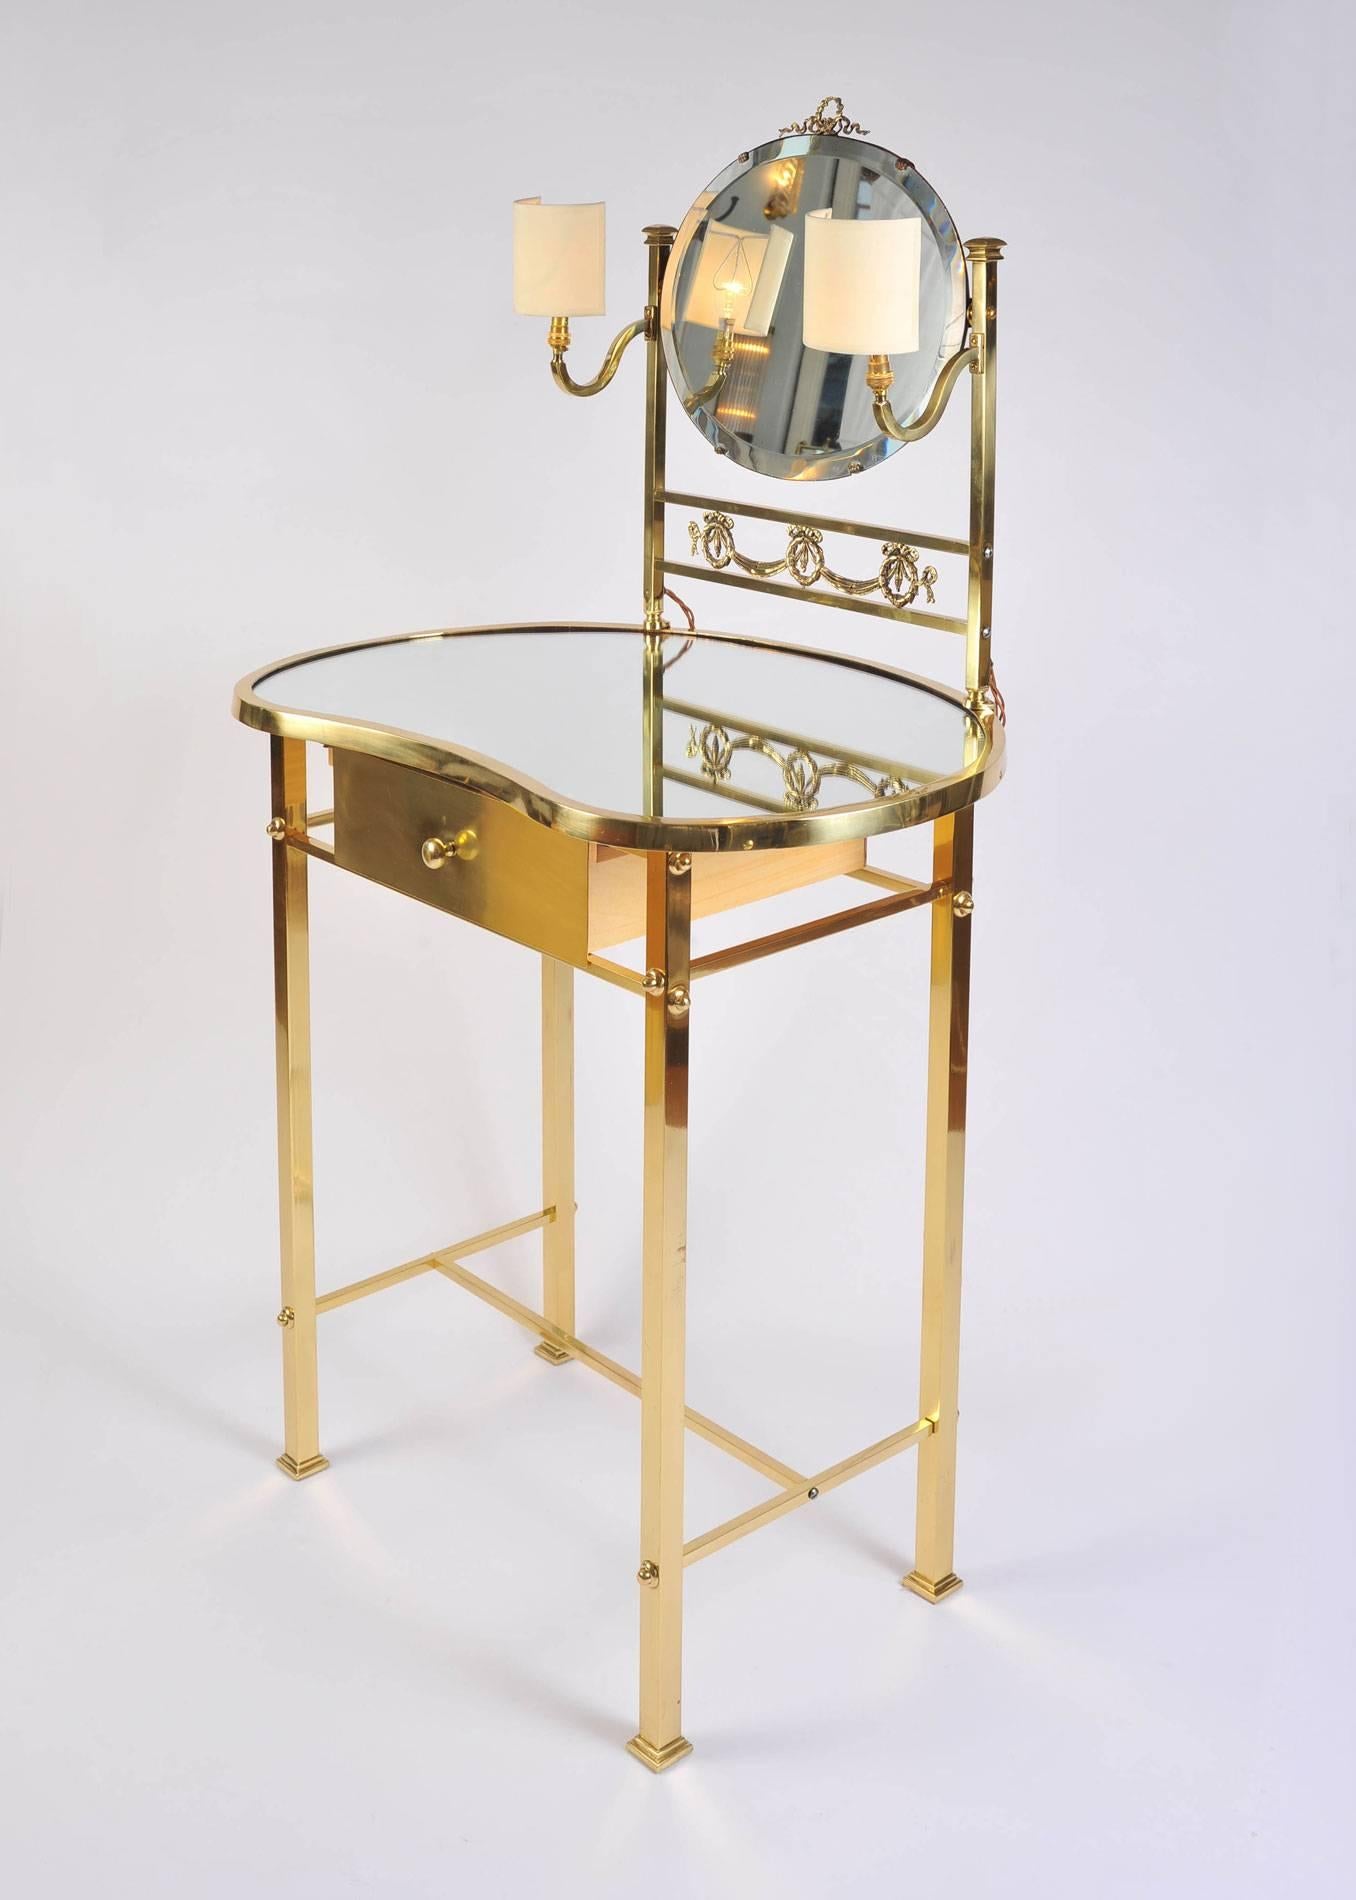 Kidney-shaped brass dressing table with brass drawer and mirrored top. Deep-beveled oval mirror supported by decorative brass frame with lamp holders.